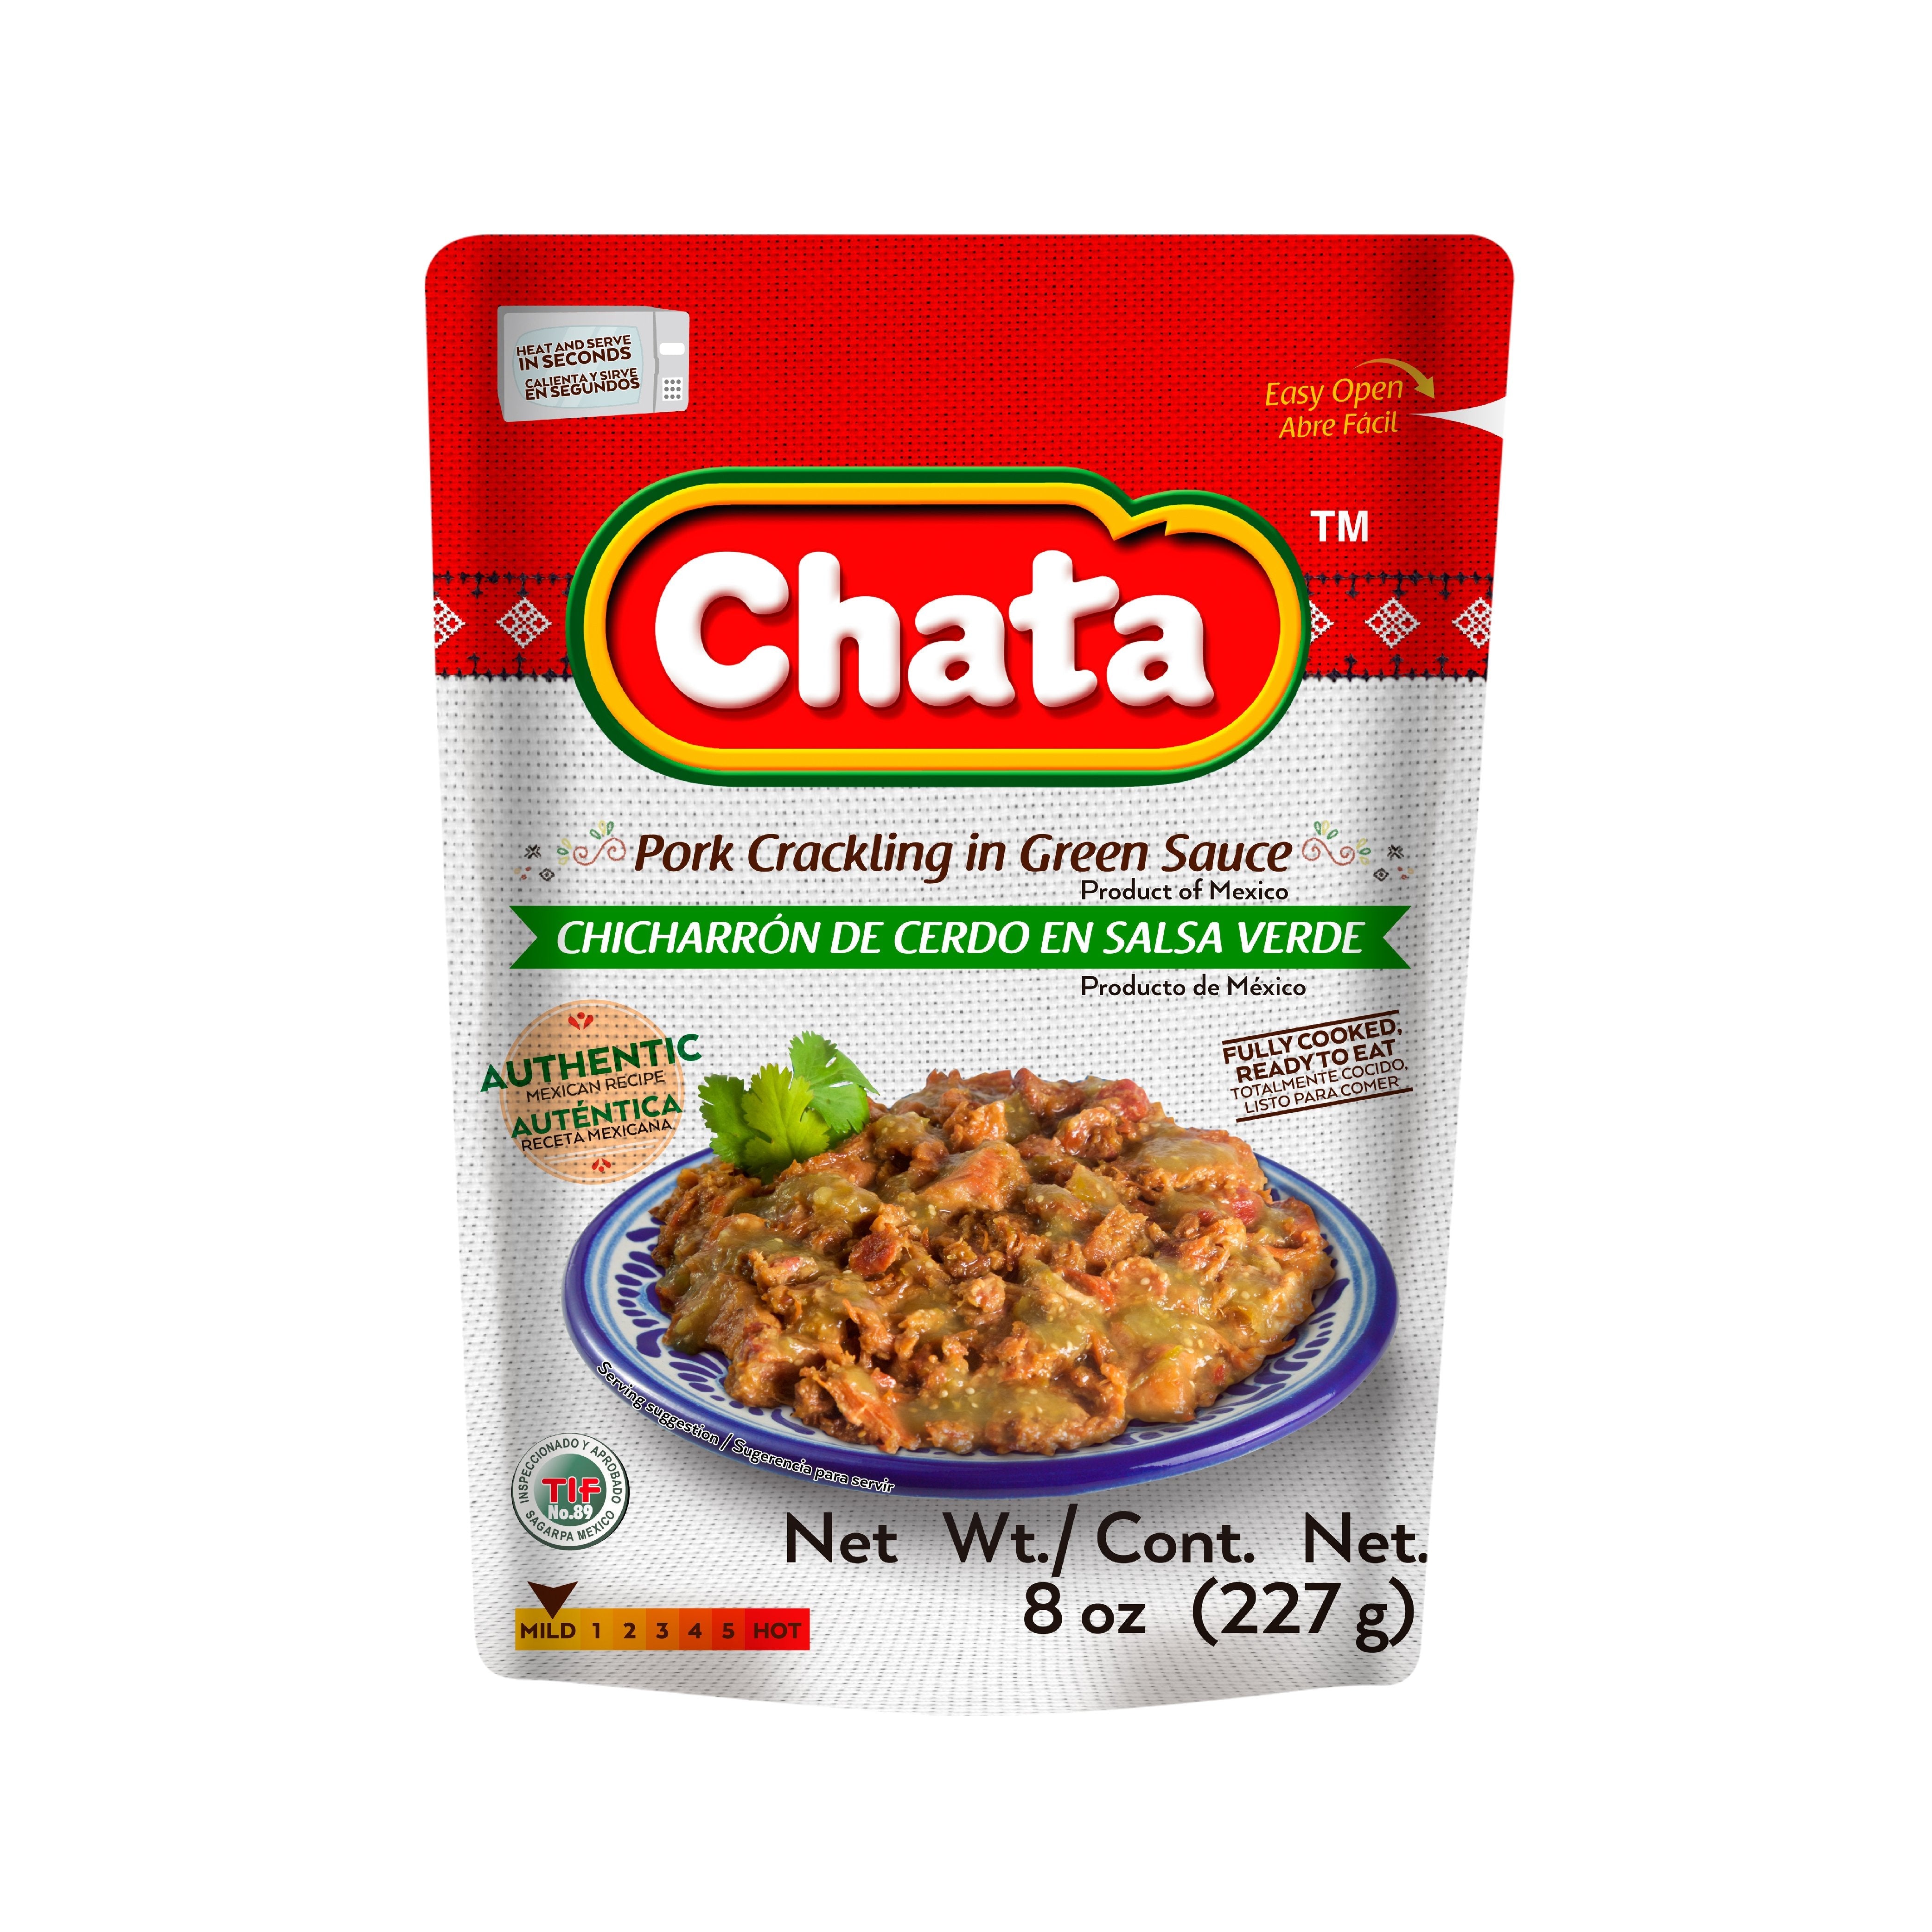 Chata Pork Crackling in Green Sauce Pouch, 8 oz, Pack of 3 - image 2 of 8